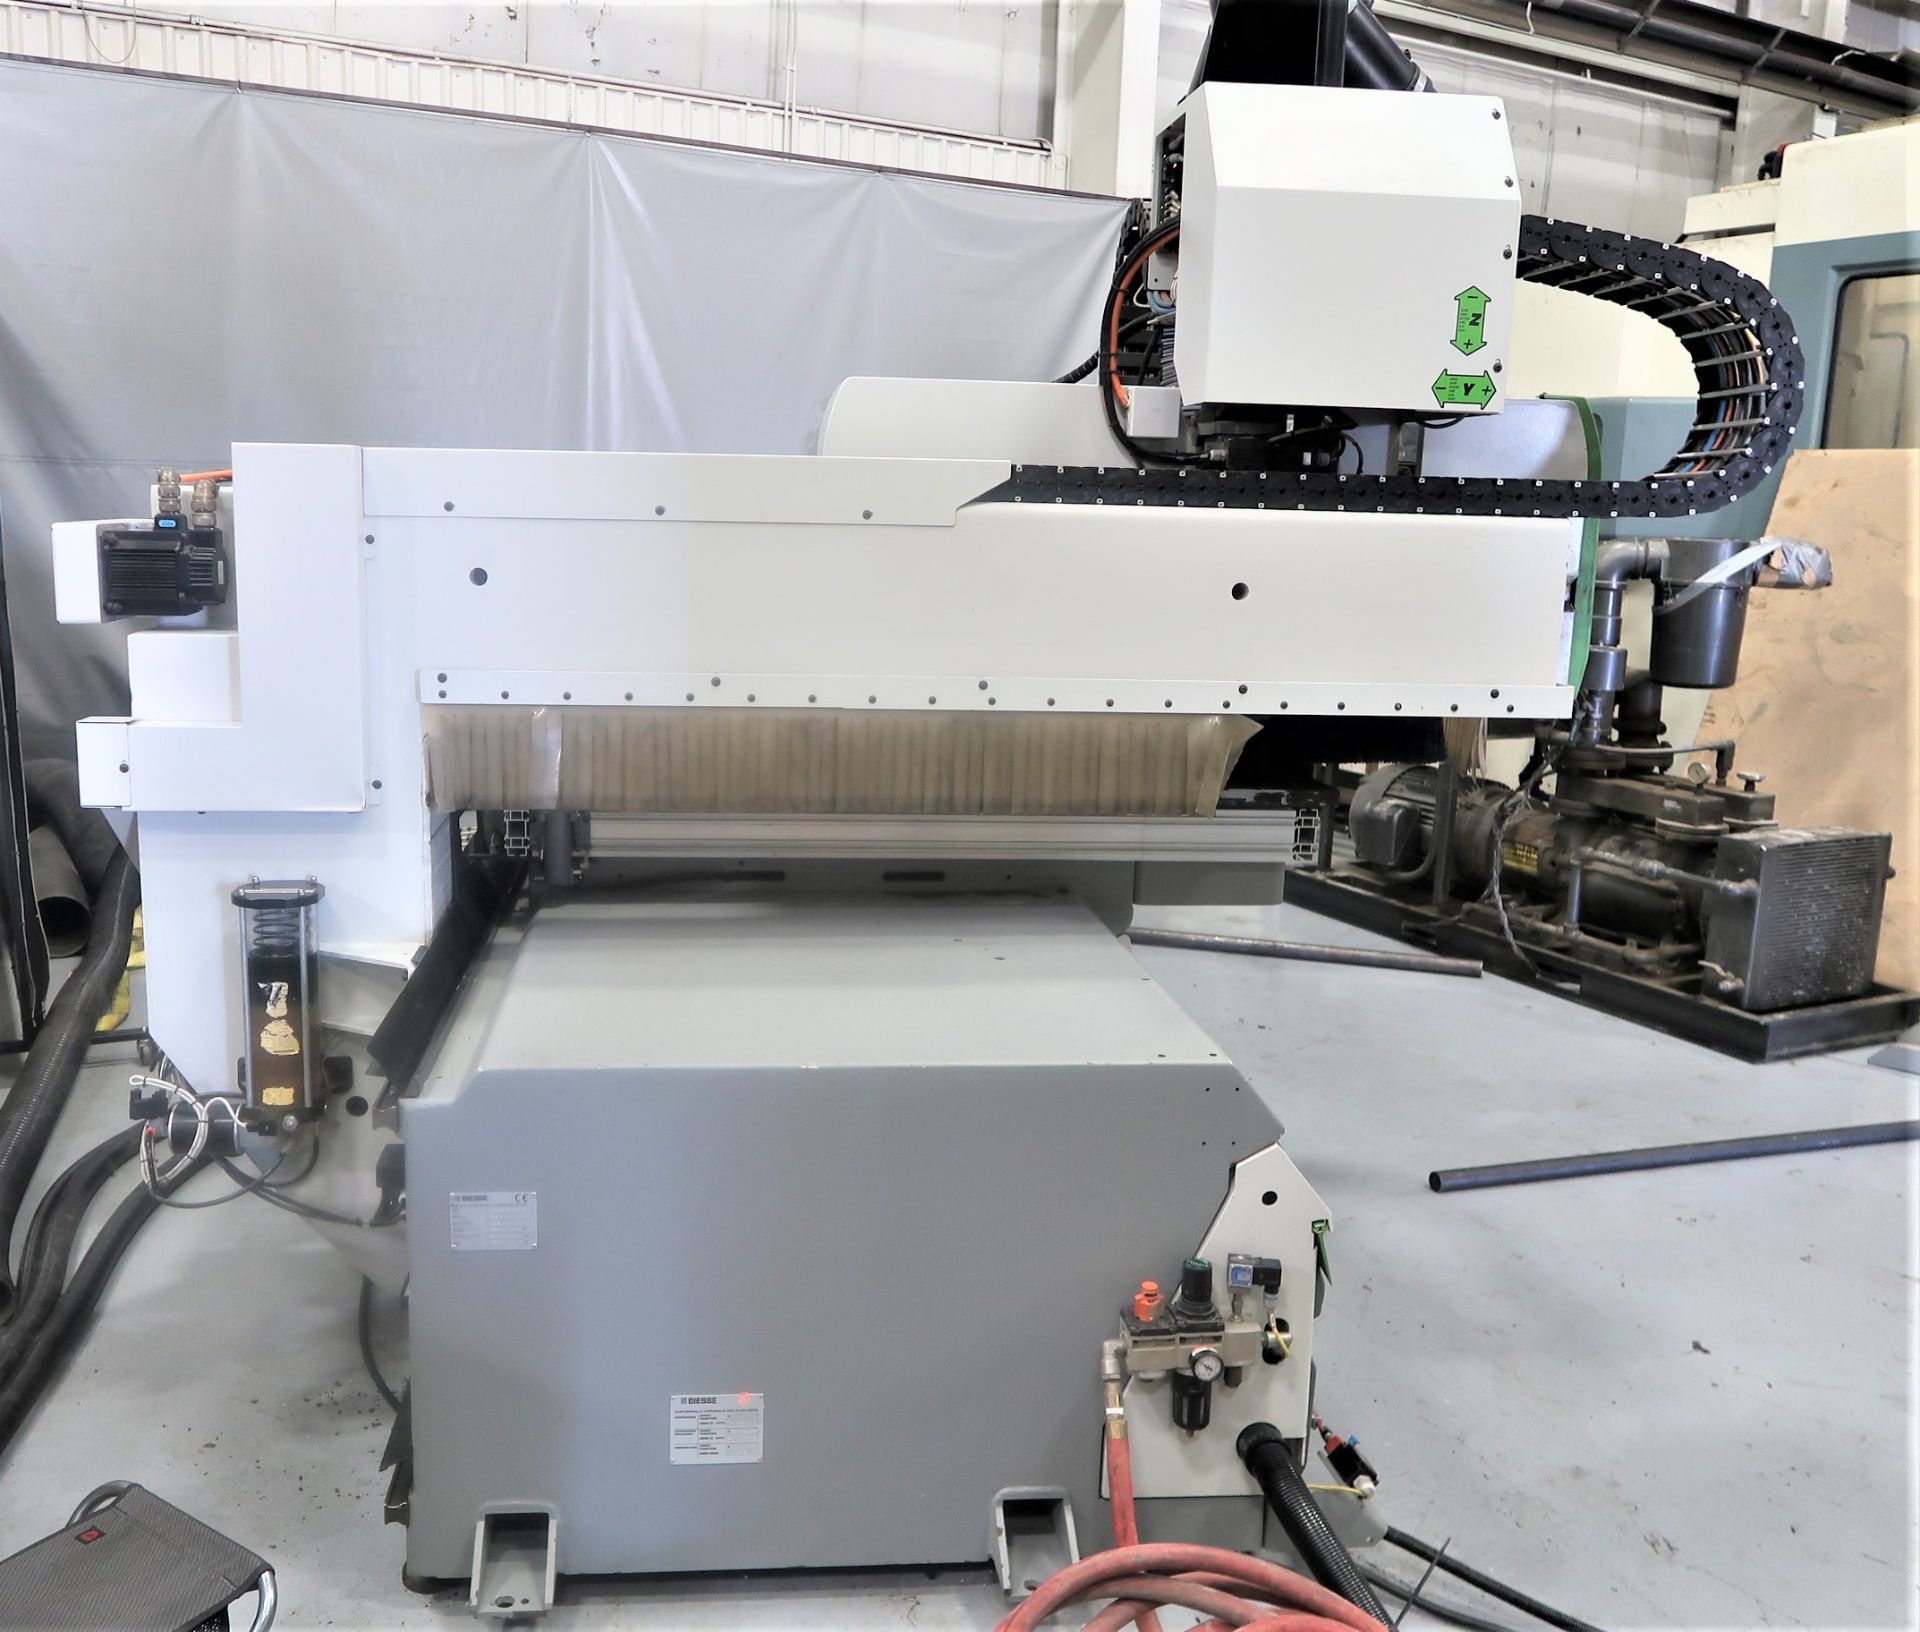 5'x12' Biesse Rover B 7.40 ft CNC 3-Axis Router with Boring Unit & Aggregate Saw, S/N 64574 - Image 10 of 14